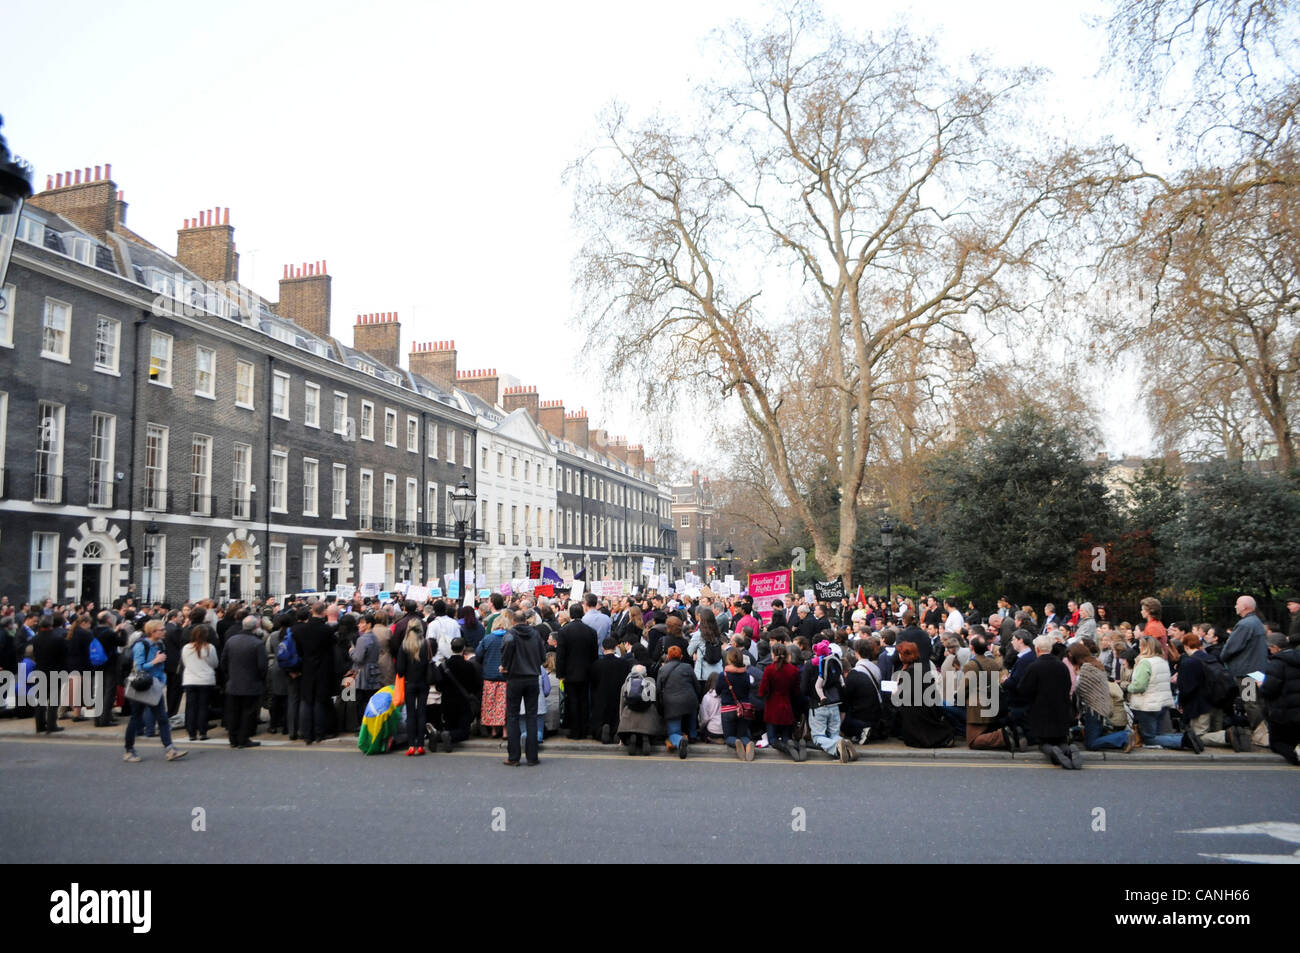 London, UK. 30/03/12. Christian Pro-Life and Anti-Abortion campaigners held prayers and protests outside the British Pregnancy Advisory Service in Bedford Square. Pro-Choice campaigners held a counter demonstration nearby. Stock Photo